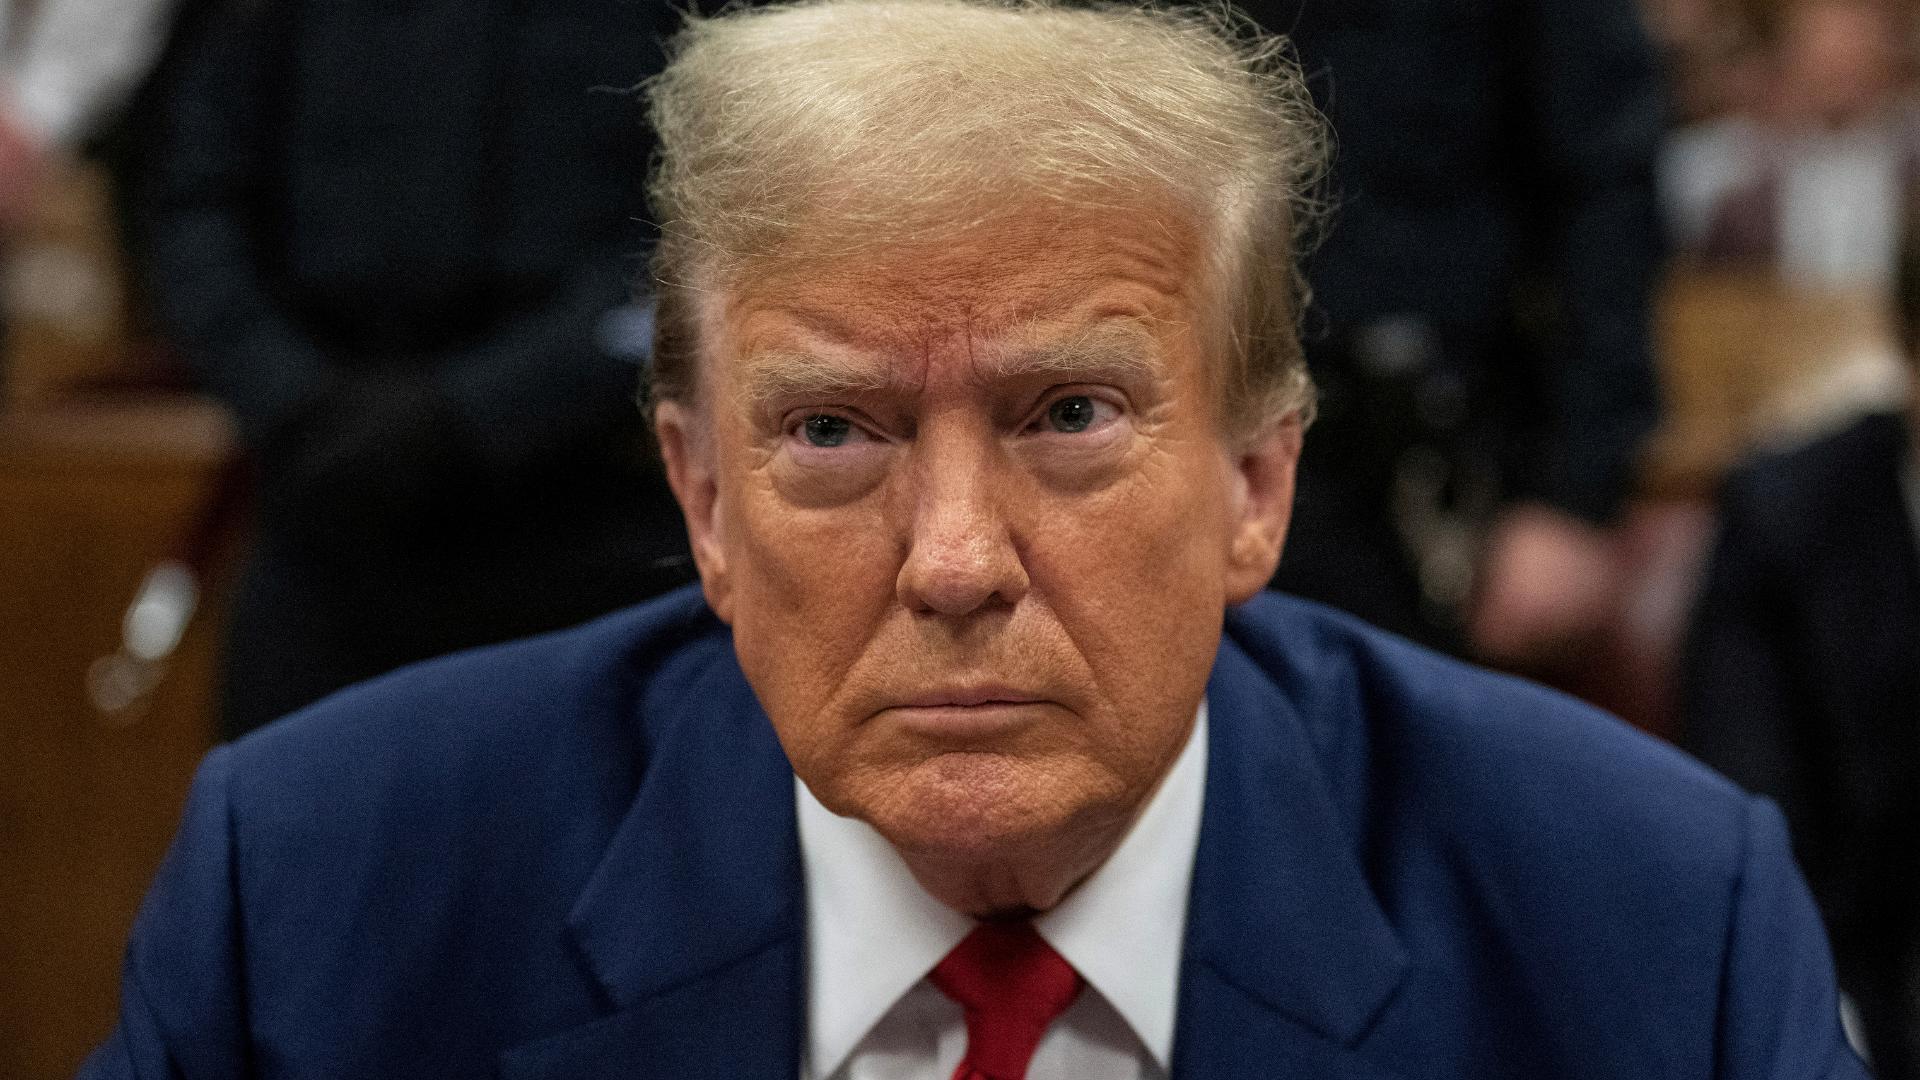 Prosecutors had alleged 10 violations, but the judge found there were nine. Trump stared down at the table in front of him as the judge read the ruling.